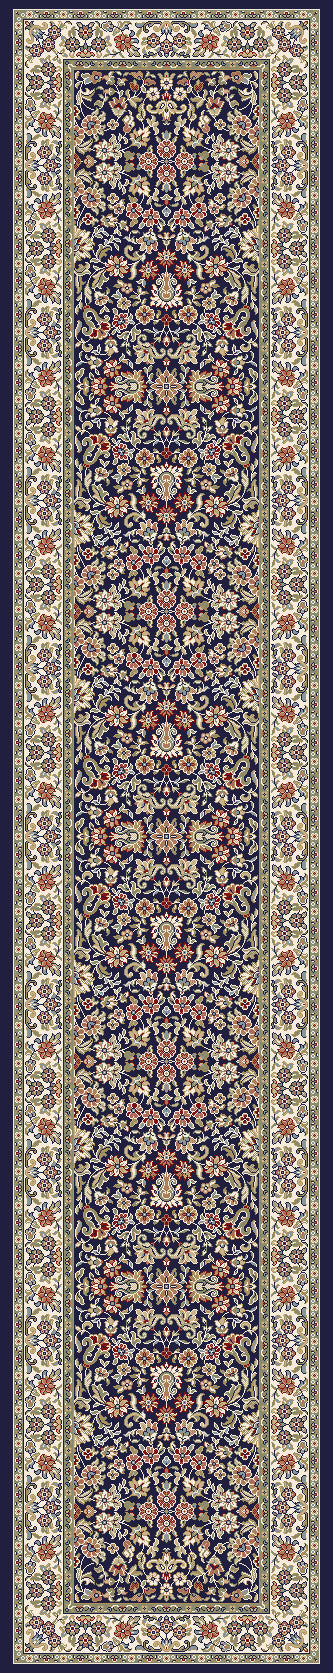 Dynamic Rugs ANCIENT GARDEN 57078 Blue/Ivory Area Rug